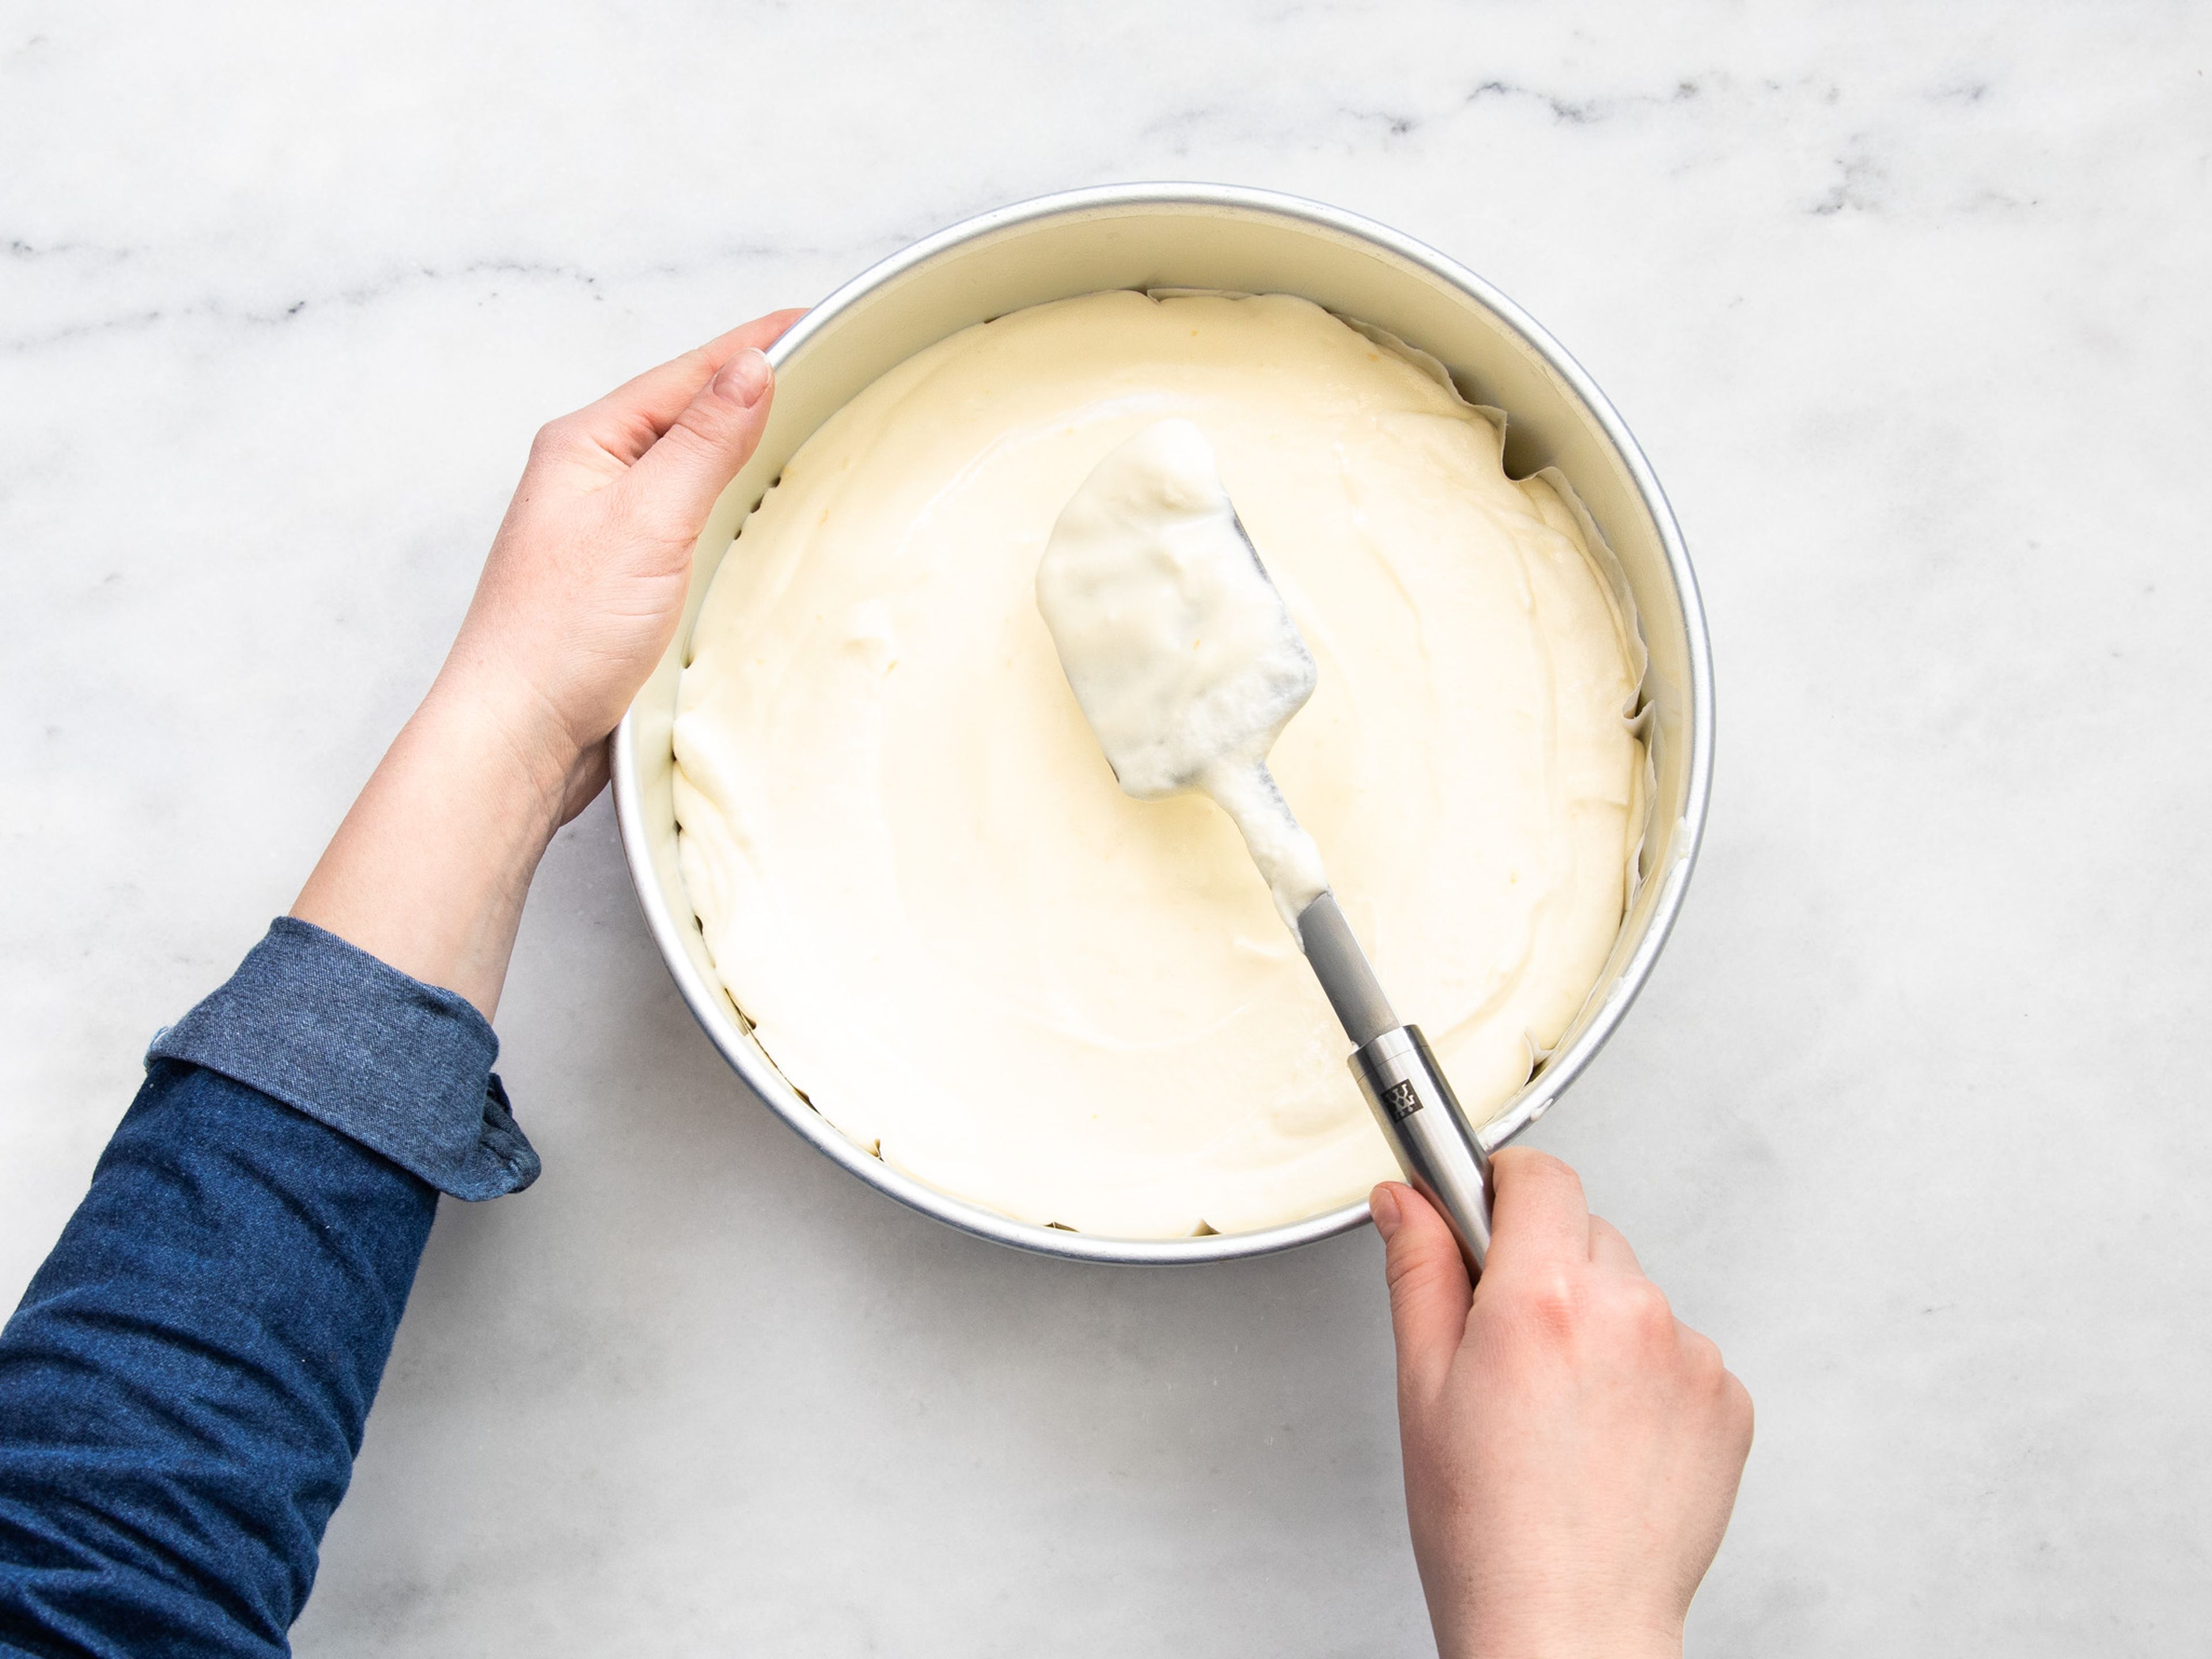 Pour the mixture into a parchment-lined springform pan, smooth the top, and bake for approx. 65 – 70 min. When finished, turn off the heat and let the cake cool inside the oven until room temperature, approx. 2 hrs. Dust with confectioner’s sugar before serving. Slice and enjoy!